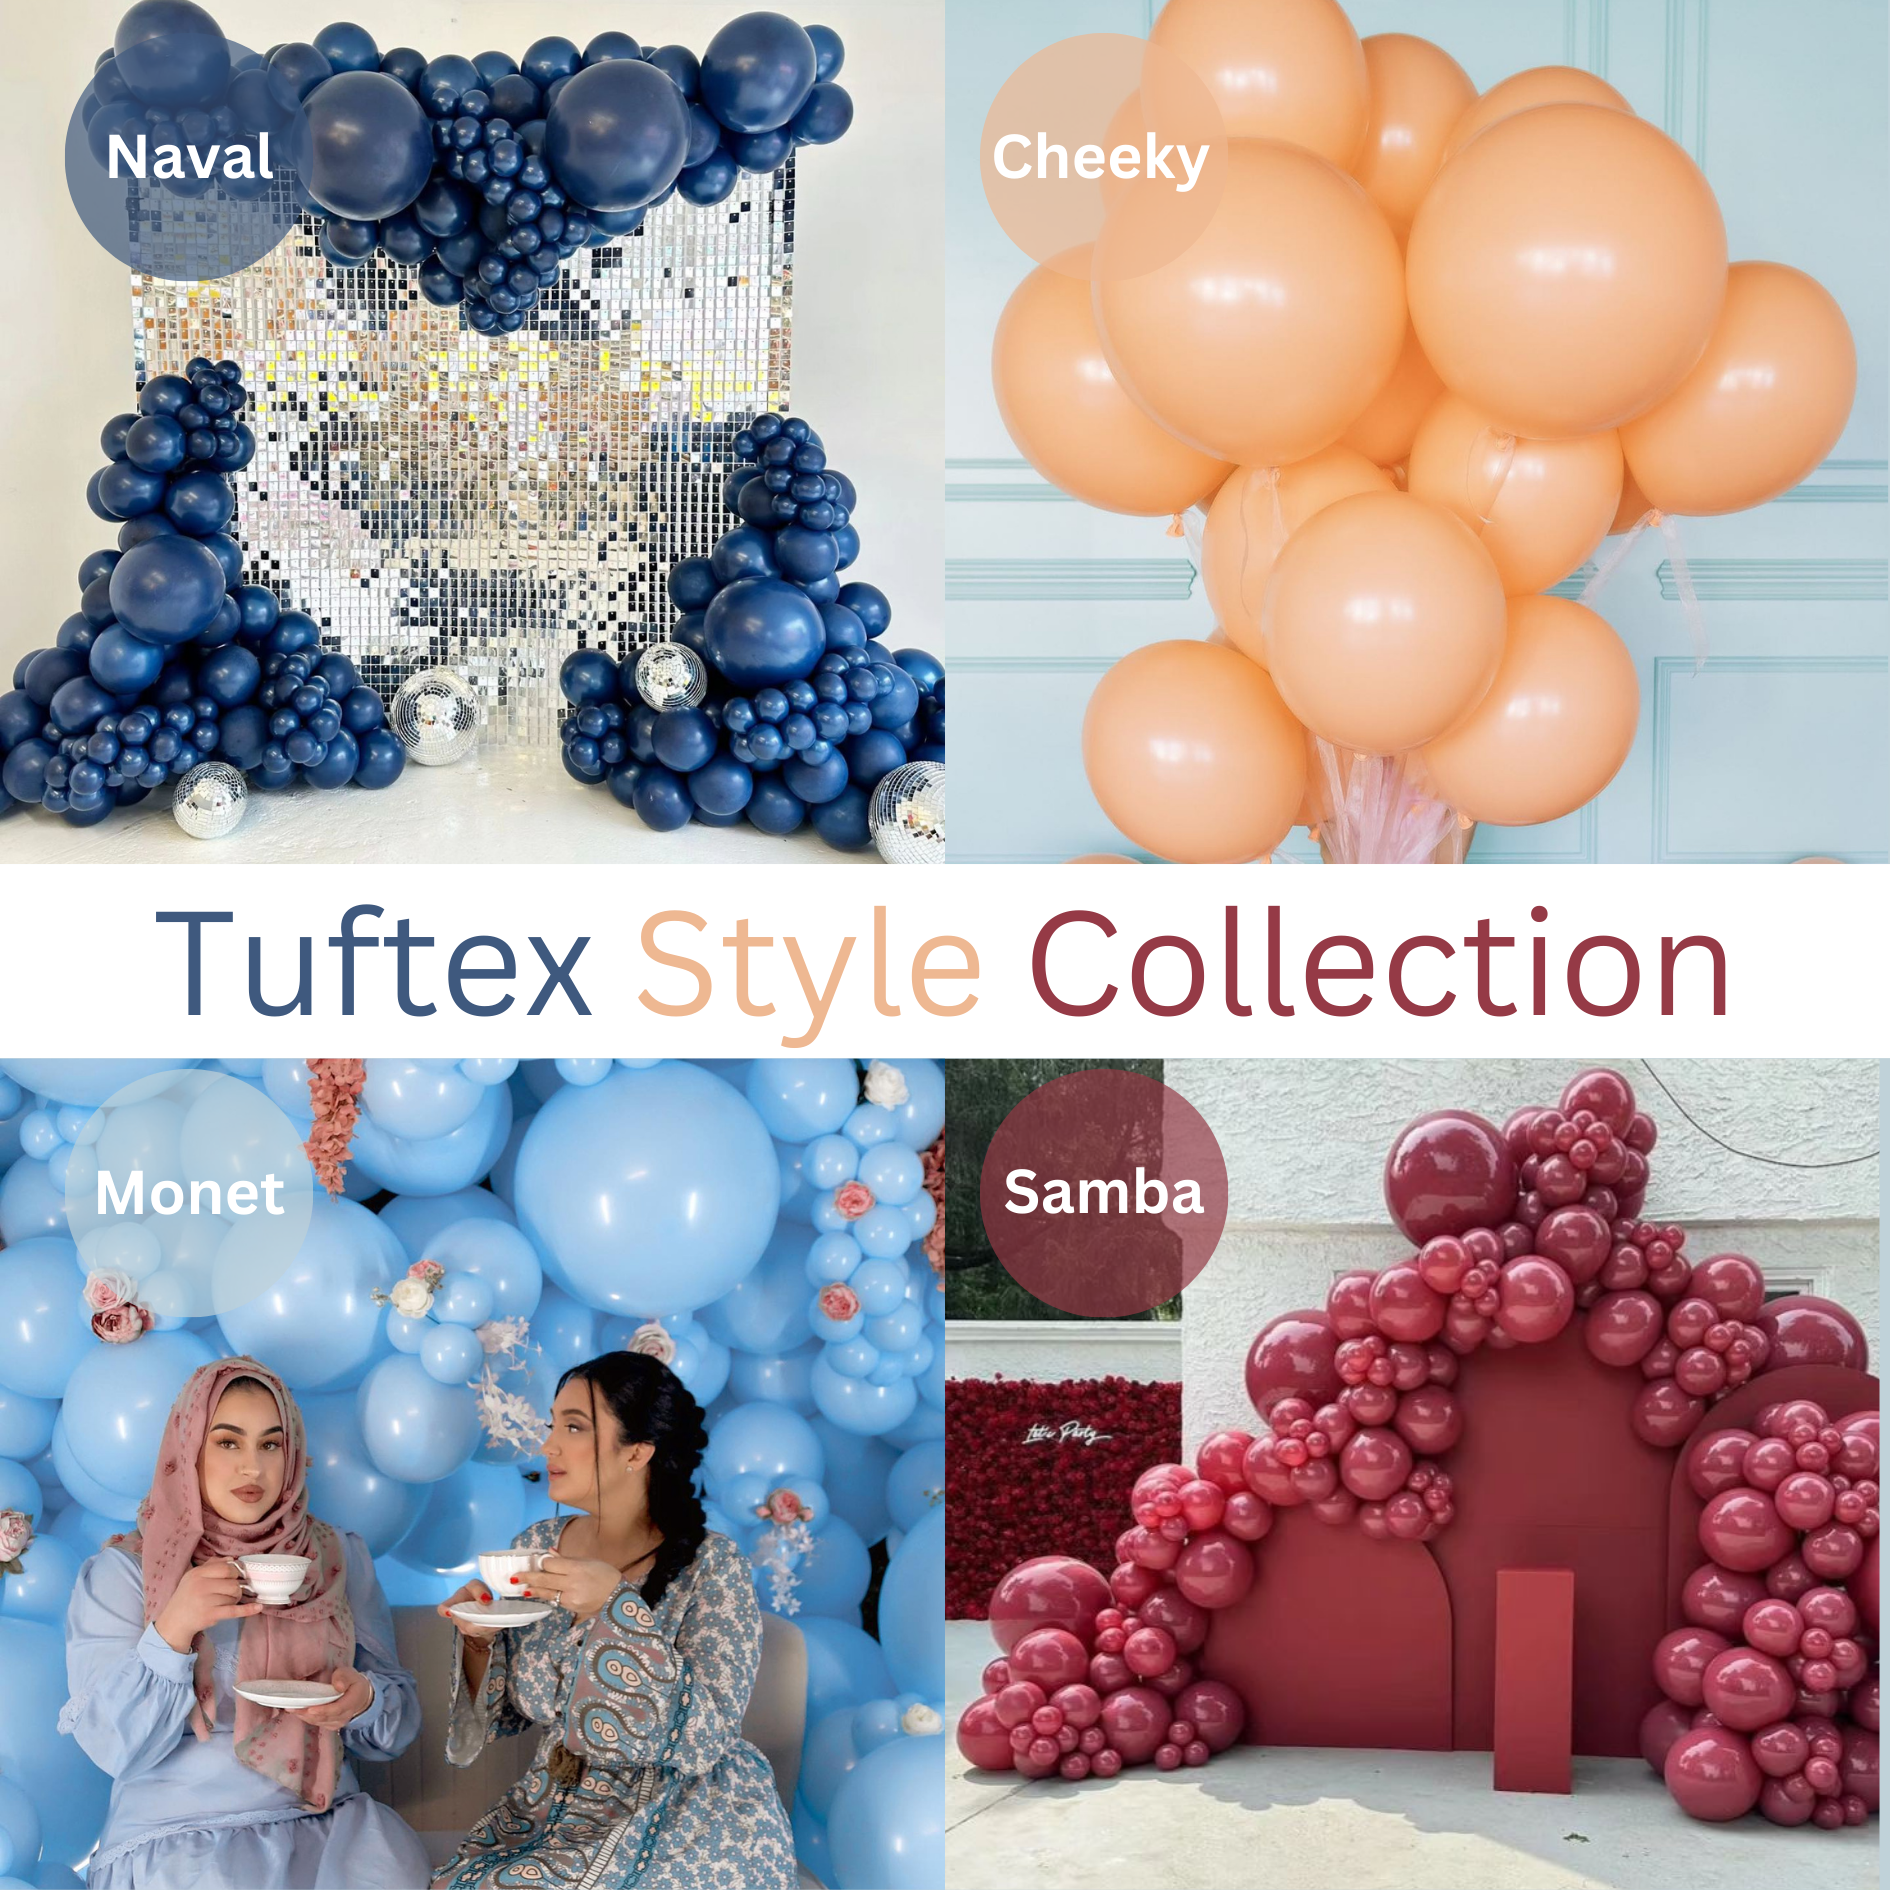 Tuftex Style Collection